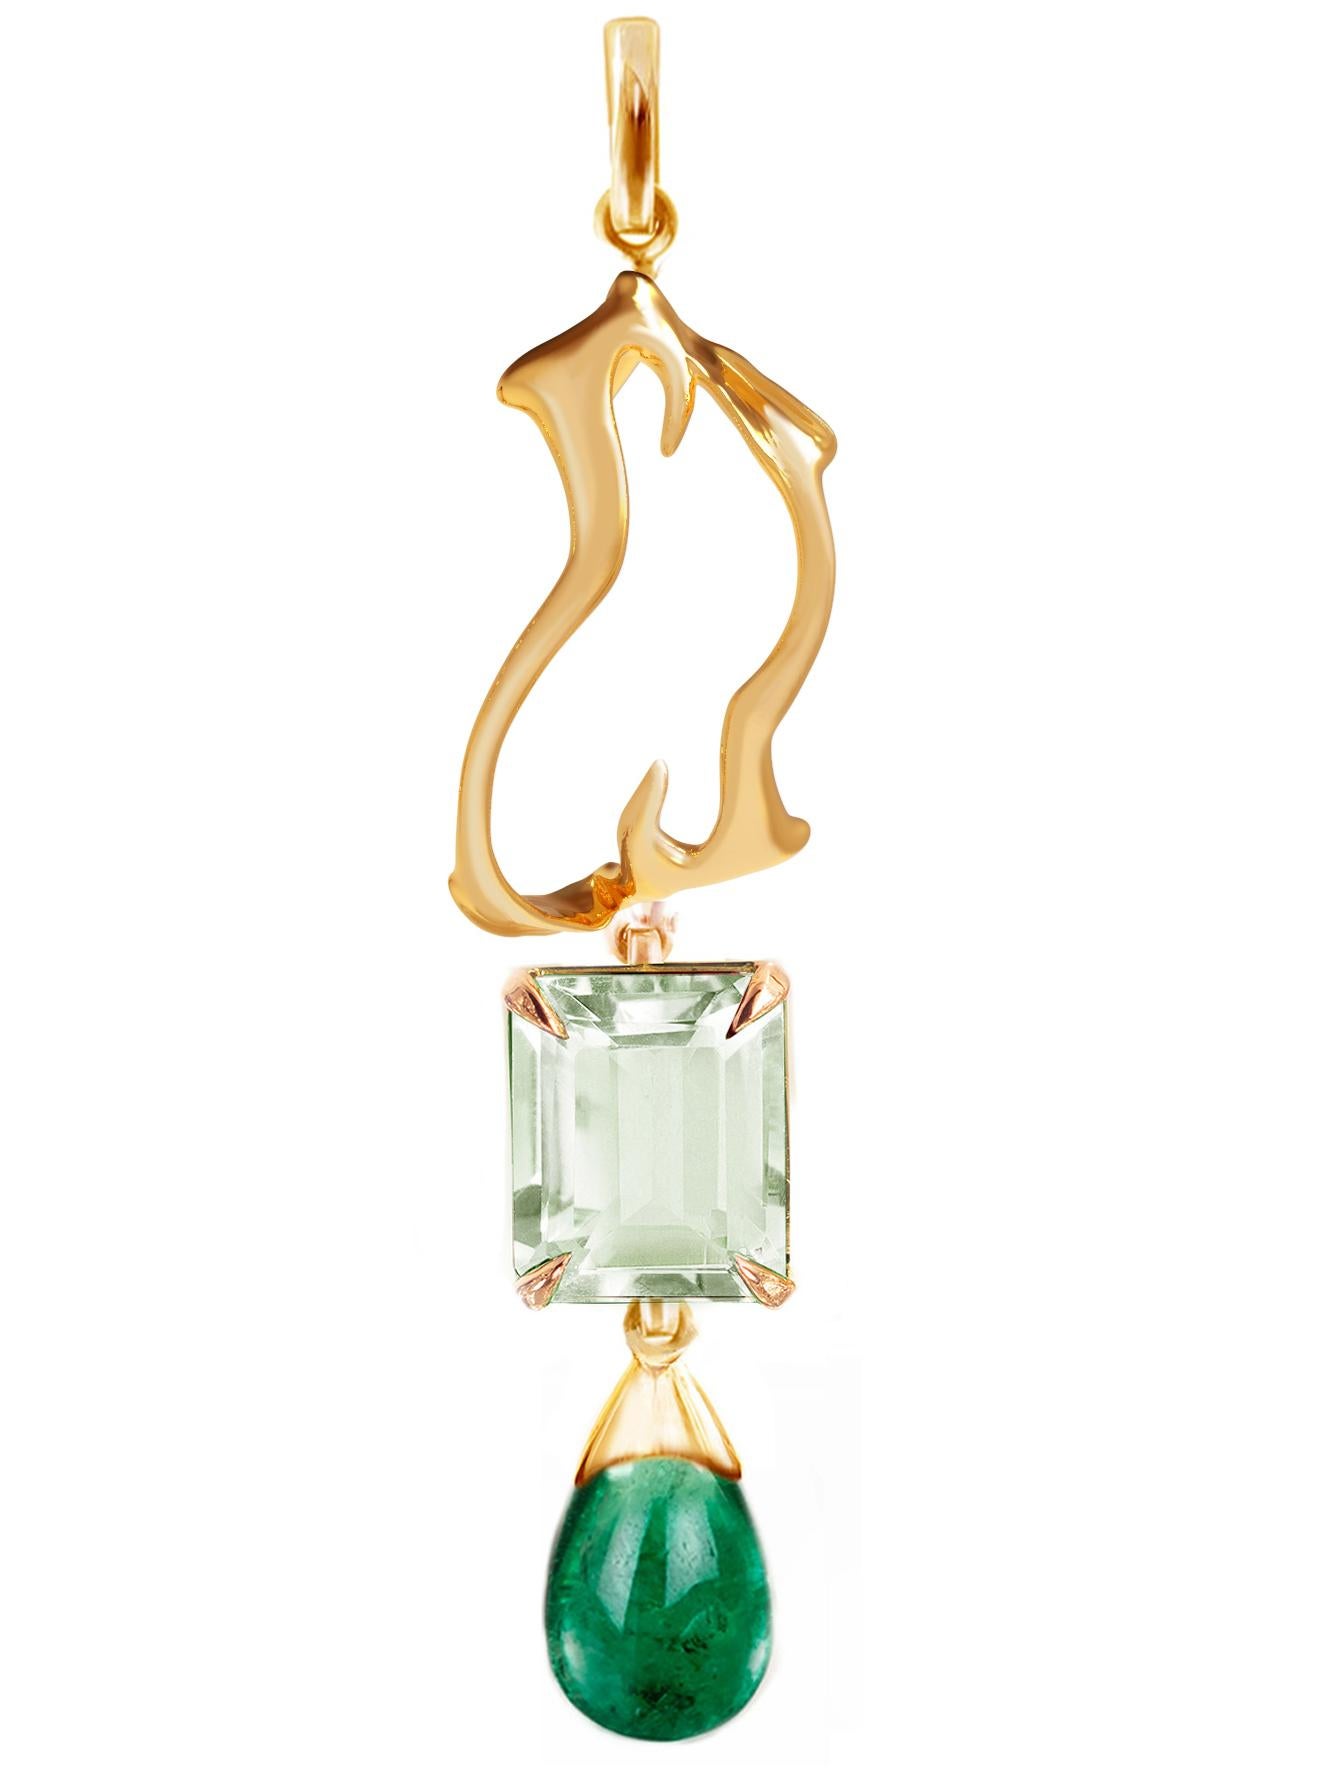 This contemporary drop pendant necklace is made of 18 karat yellow gold with detachable green quartz and emerald. The highest quality gold has liquid sparkling surface as the perfect jewellery highlight. The work is made by the fine jewellery